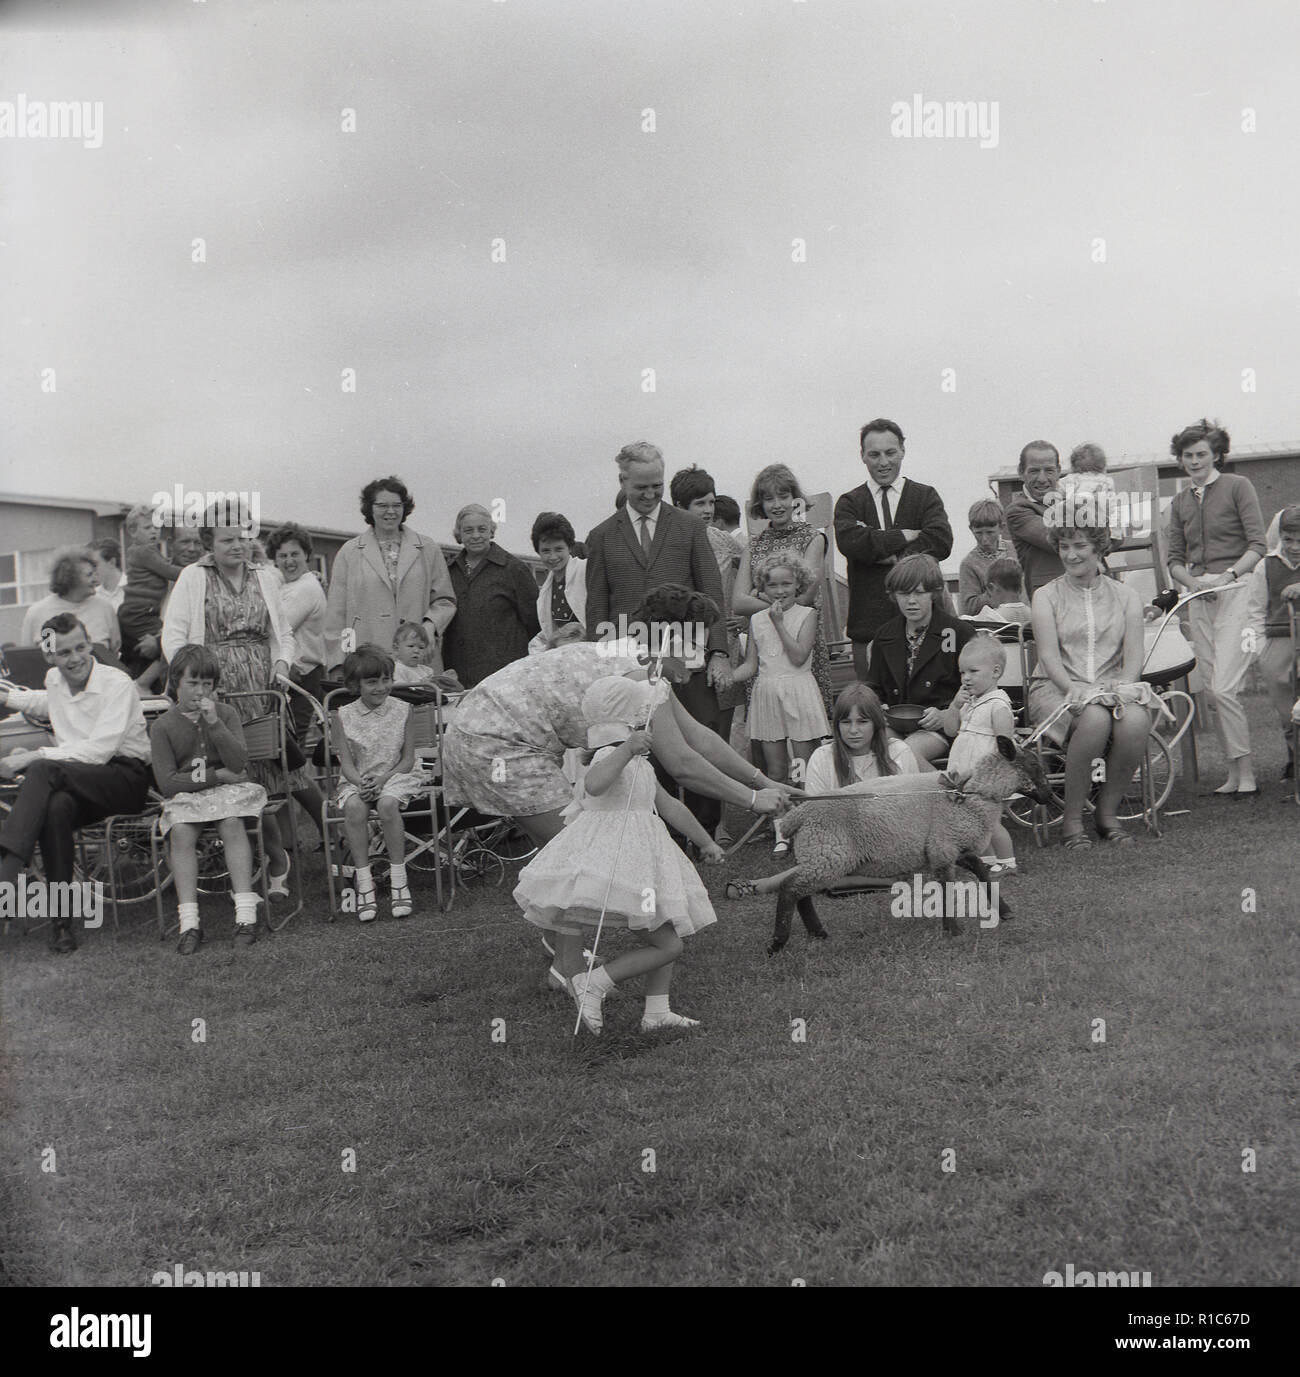 1967, historical, at an English village summer fete, a mother and her daughter dressed as 'little bo-peep', a character from a popular children's nursery rhyme about a shepherdess, running in a field holding small sheep or lamb, England, UK. Stock Photo